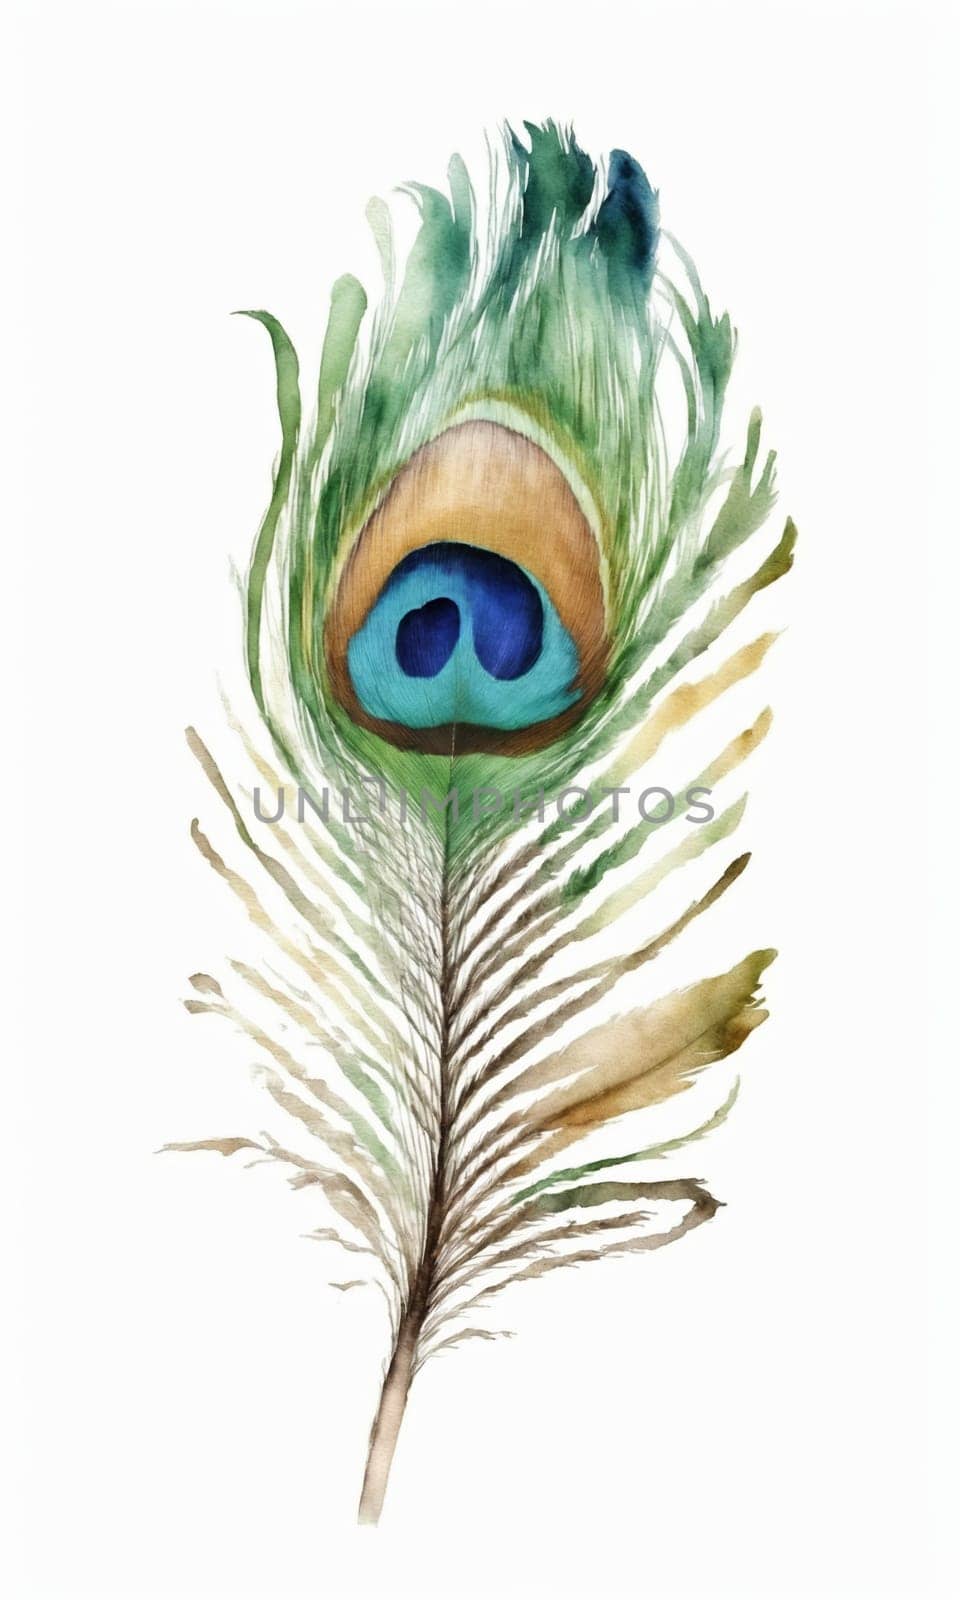 Watercolor peacock feather on white background. Hand drawn illustration. by Andre1ns